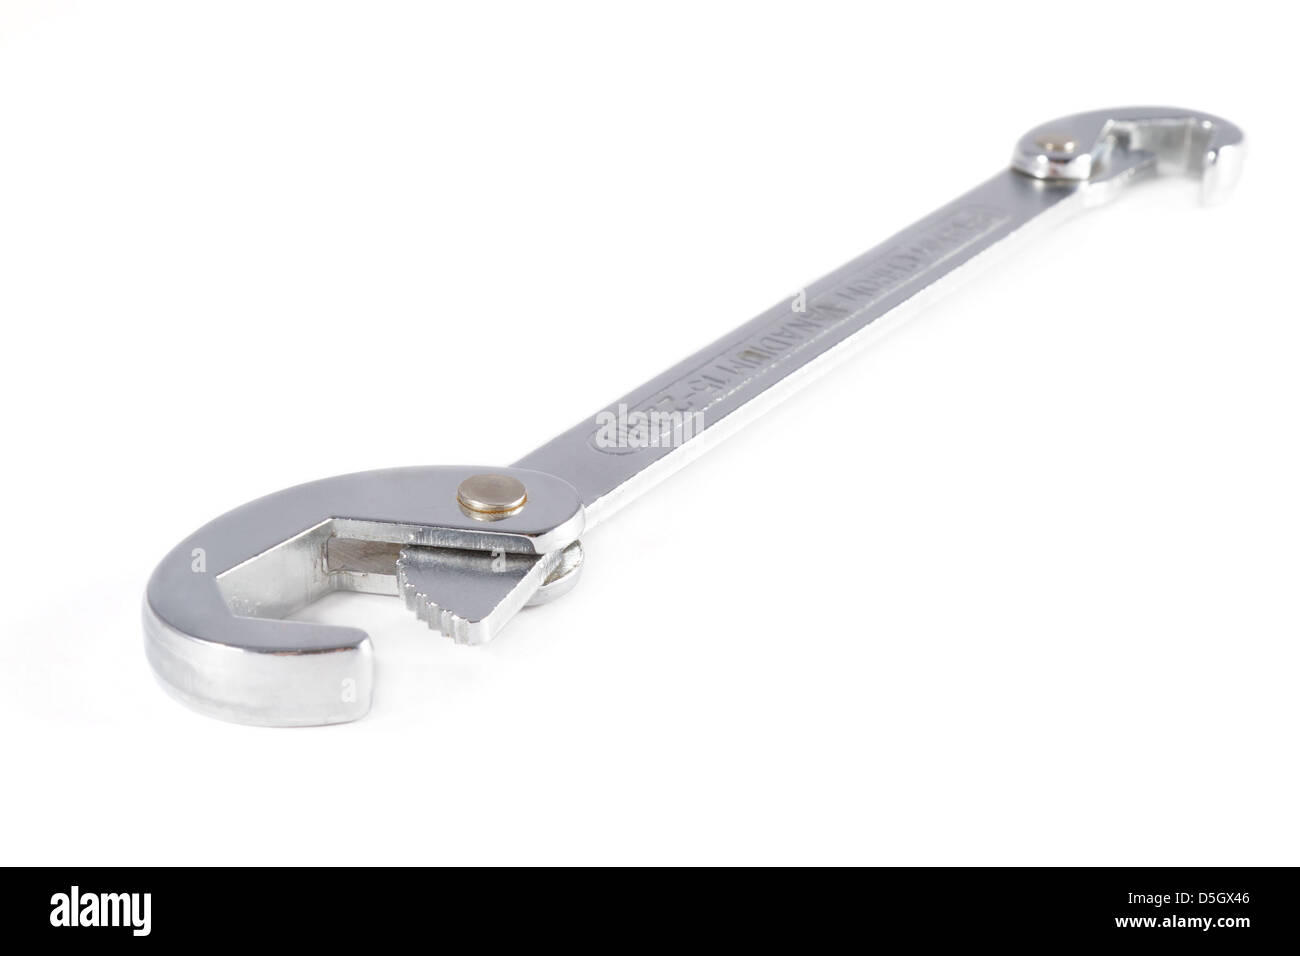 Work Tool - spanner on a white background Stock Photo